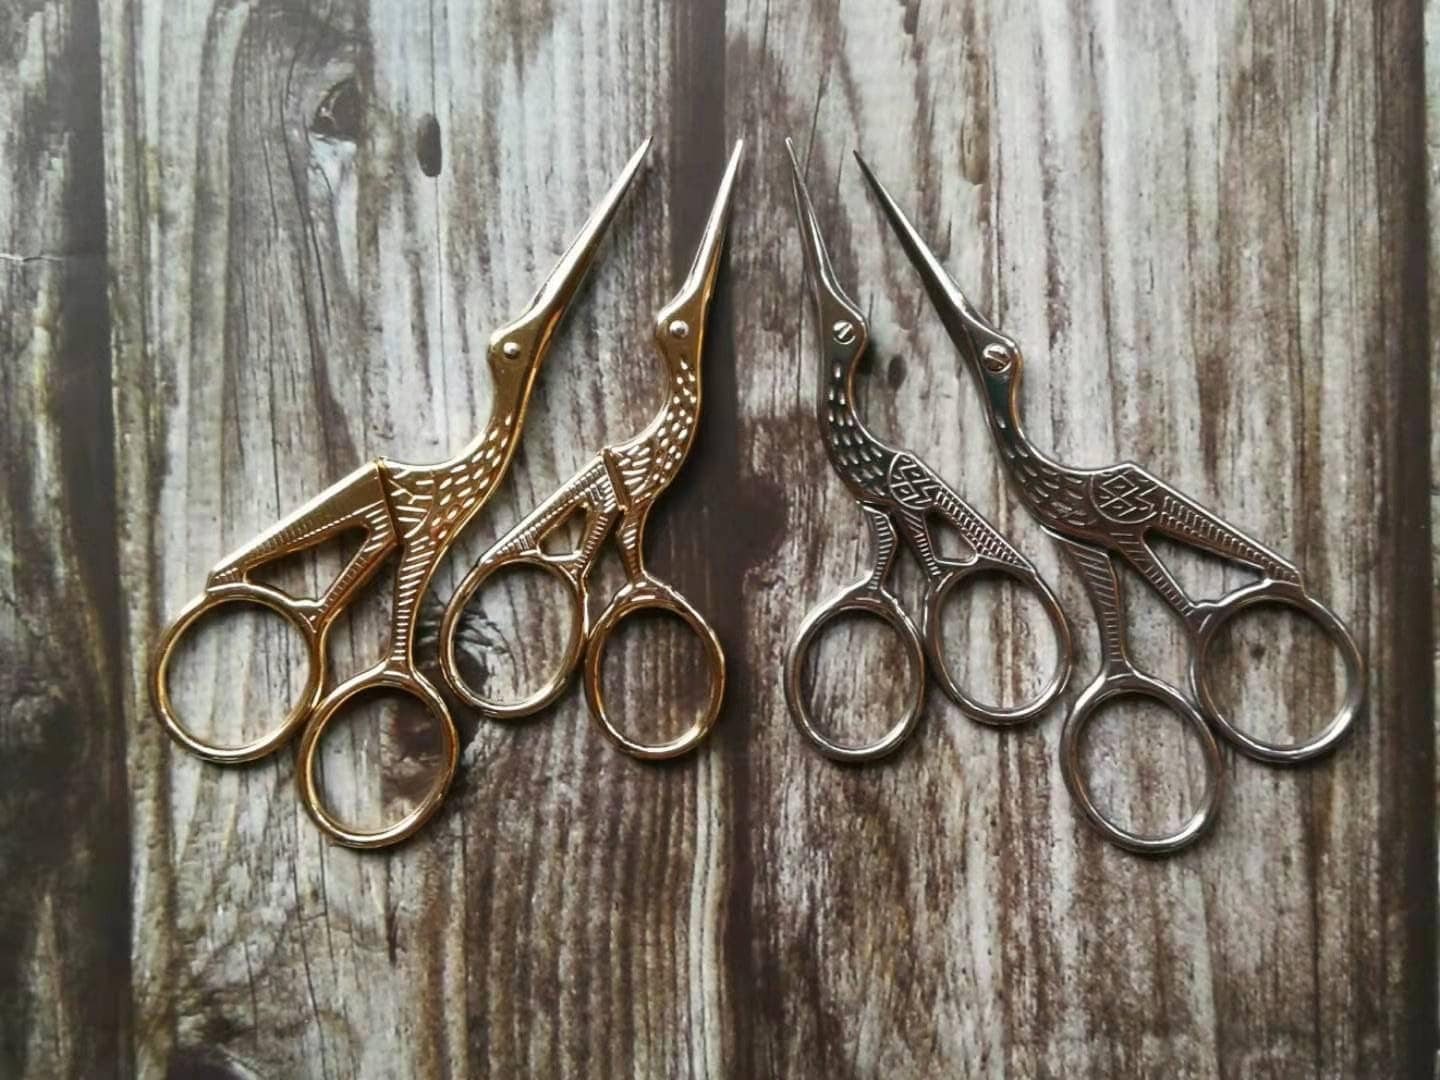 Silver Stork Embroidery Scissors, Sewing Scissors, Quality Crane Craft  Scissors, Knitting and Crochet 